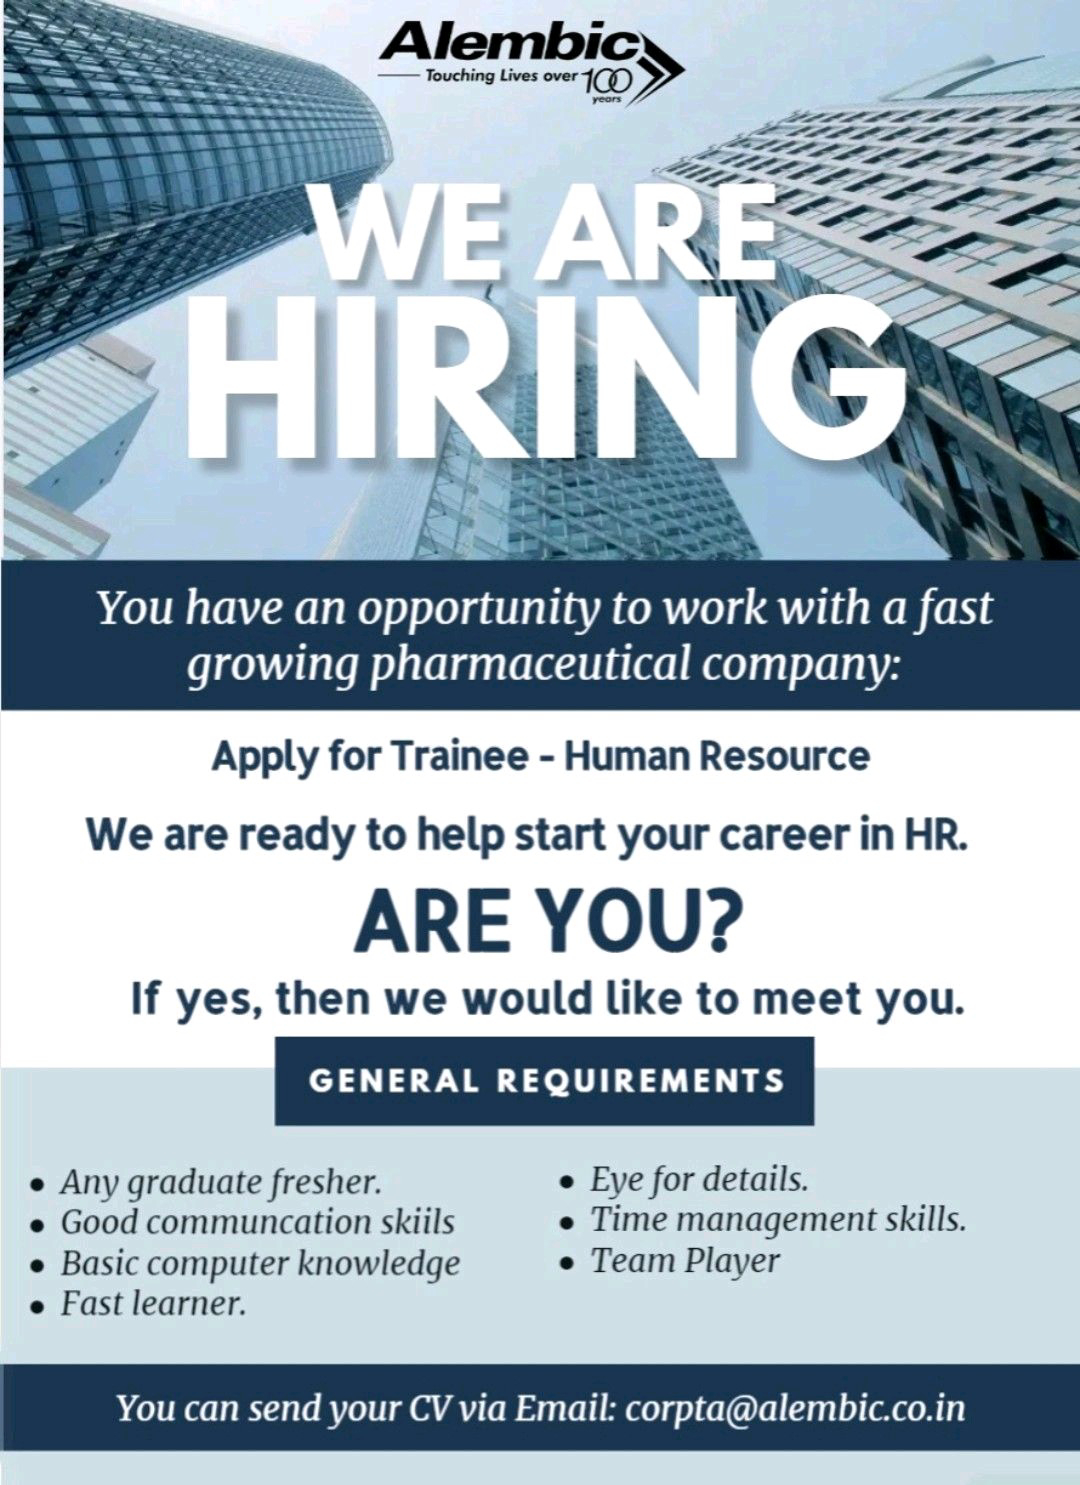 Job Available's for Alembic Pharmaceuticals Ltd Job Vacancy for Fresher's in Trainee - Human Resource